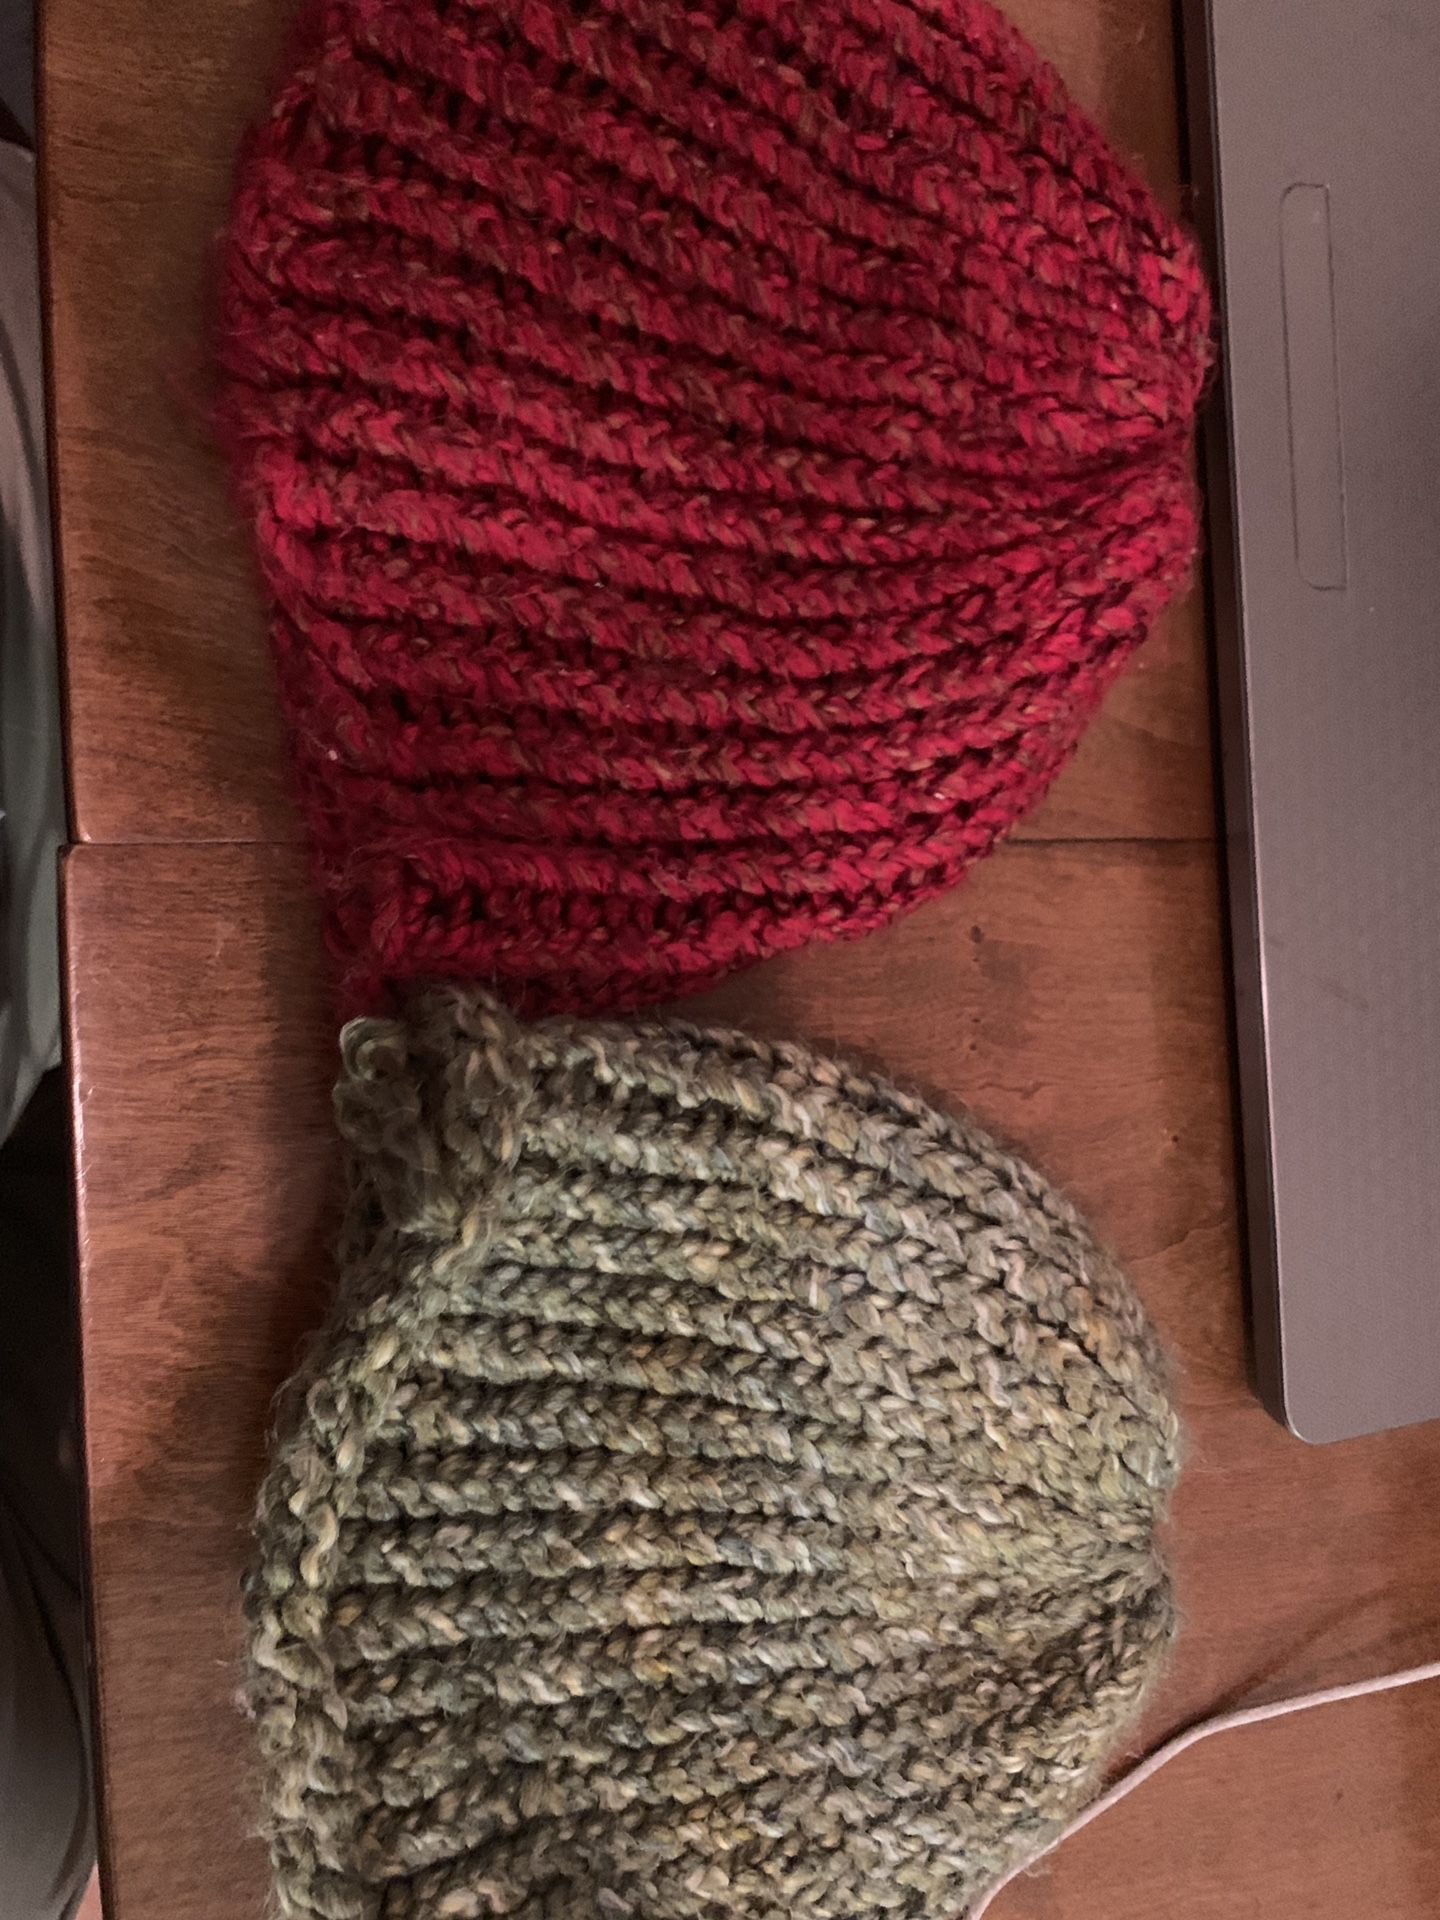 Homemade hats - so Warm! So Ugly, They’re Cute! FREE!!